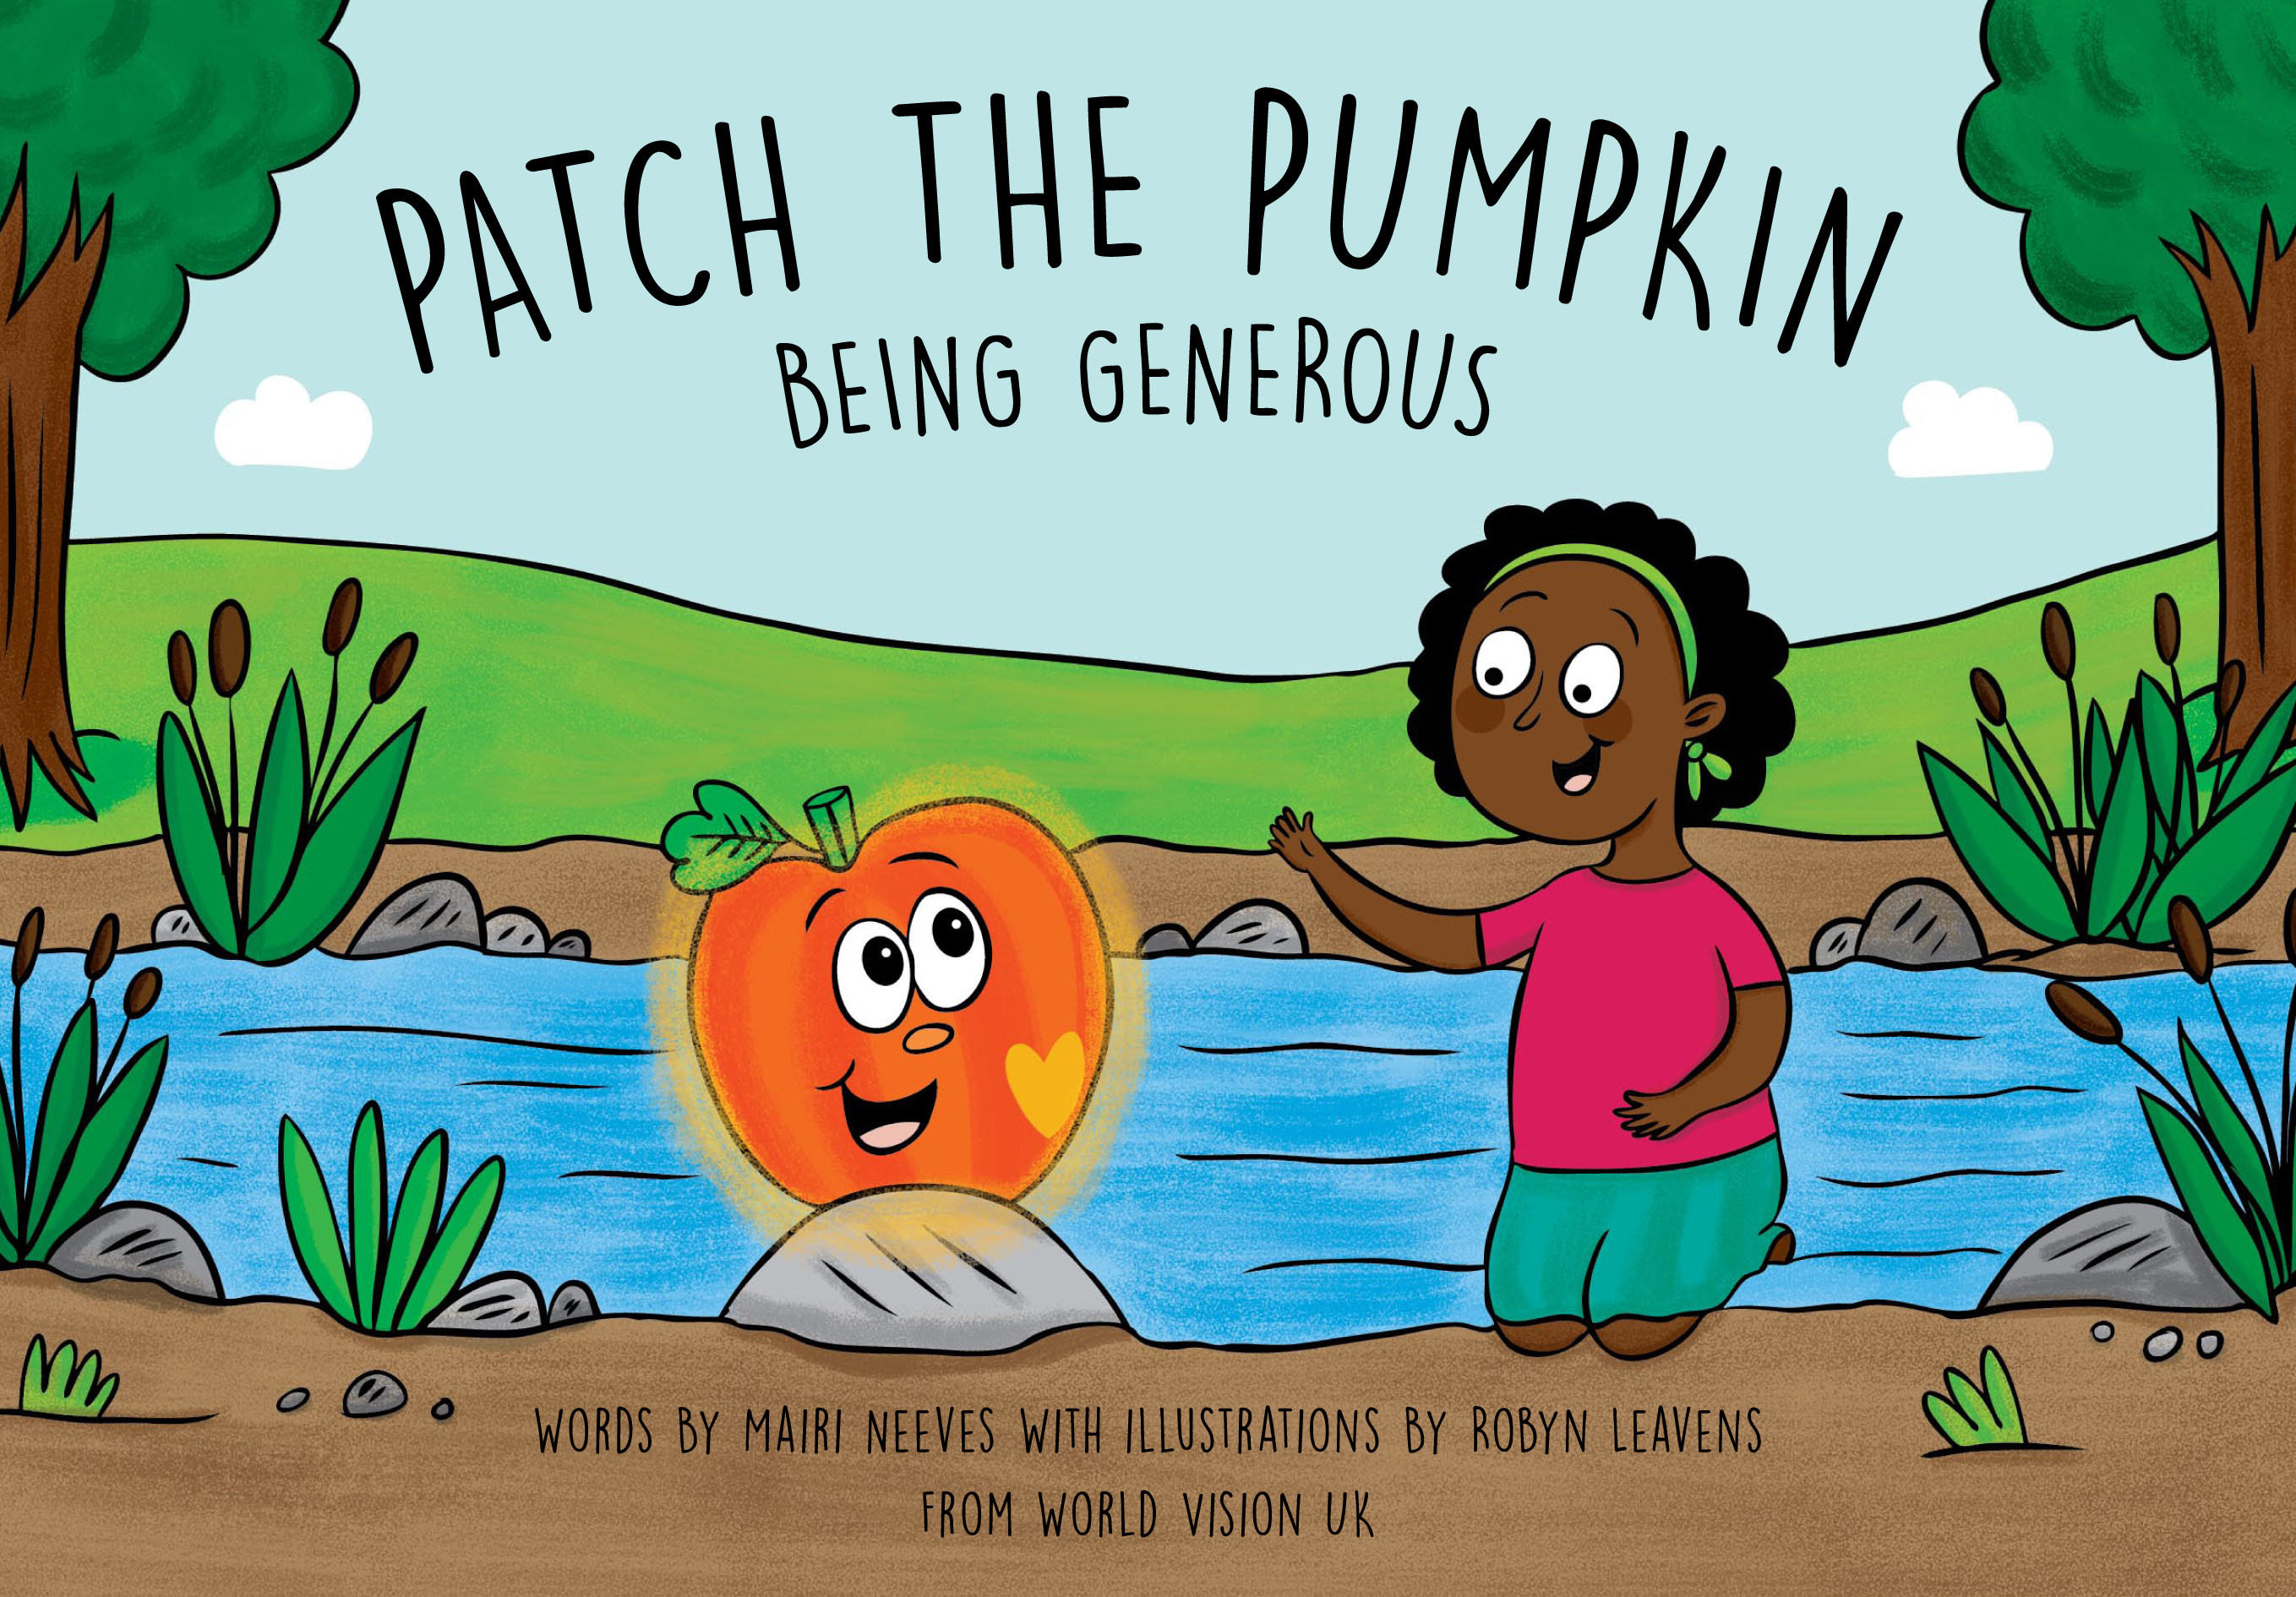 Cartoon-style book cover - cartoon pumpkin and a young girl by water. Title reads, Patch the Pumpkin: Being Generous